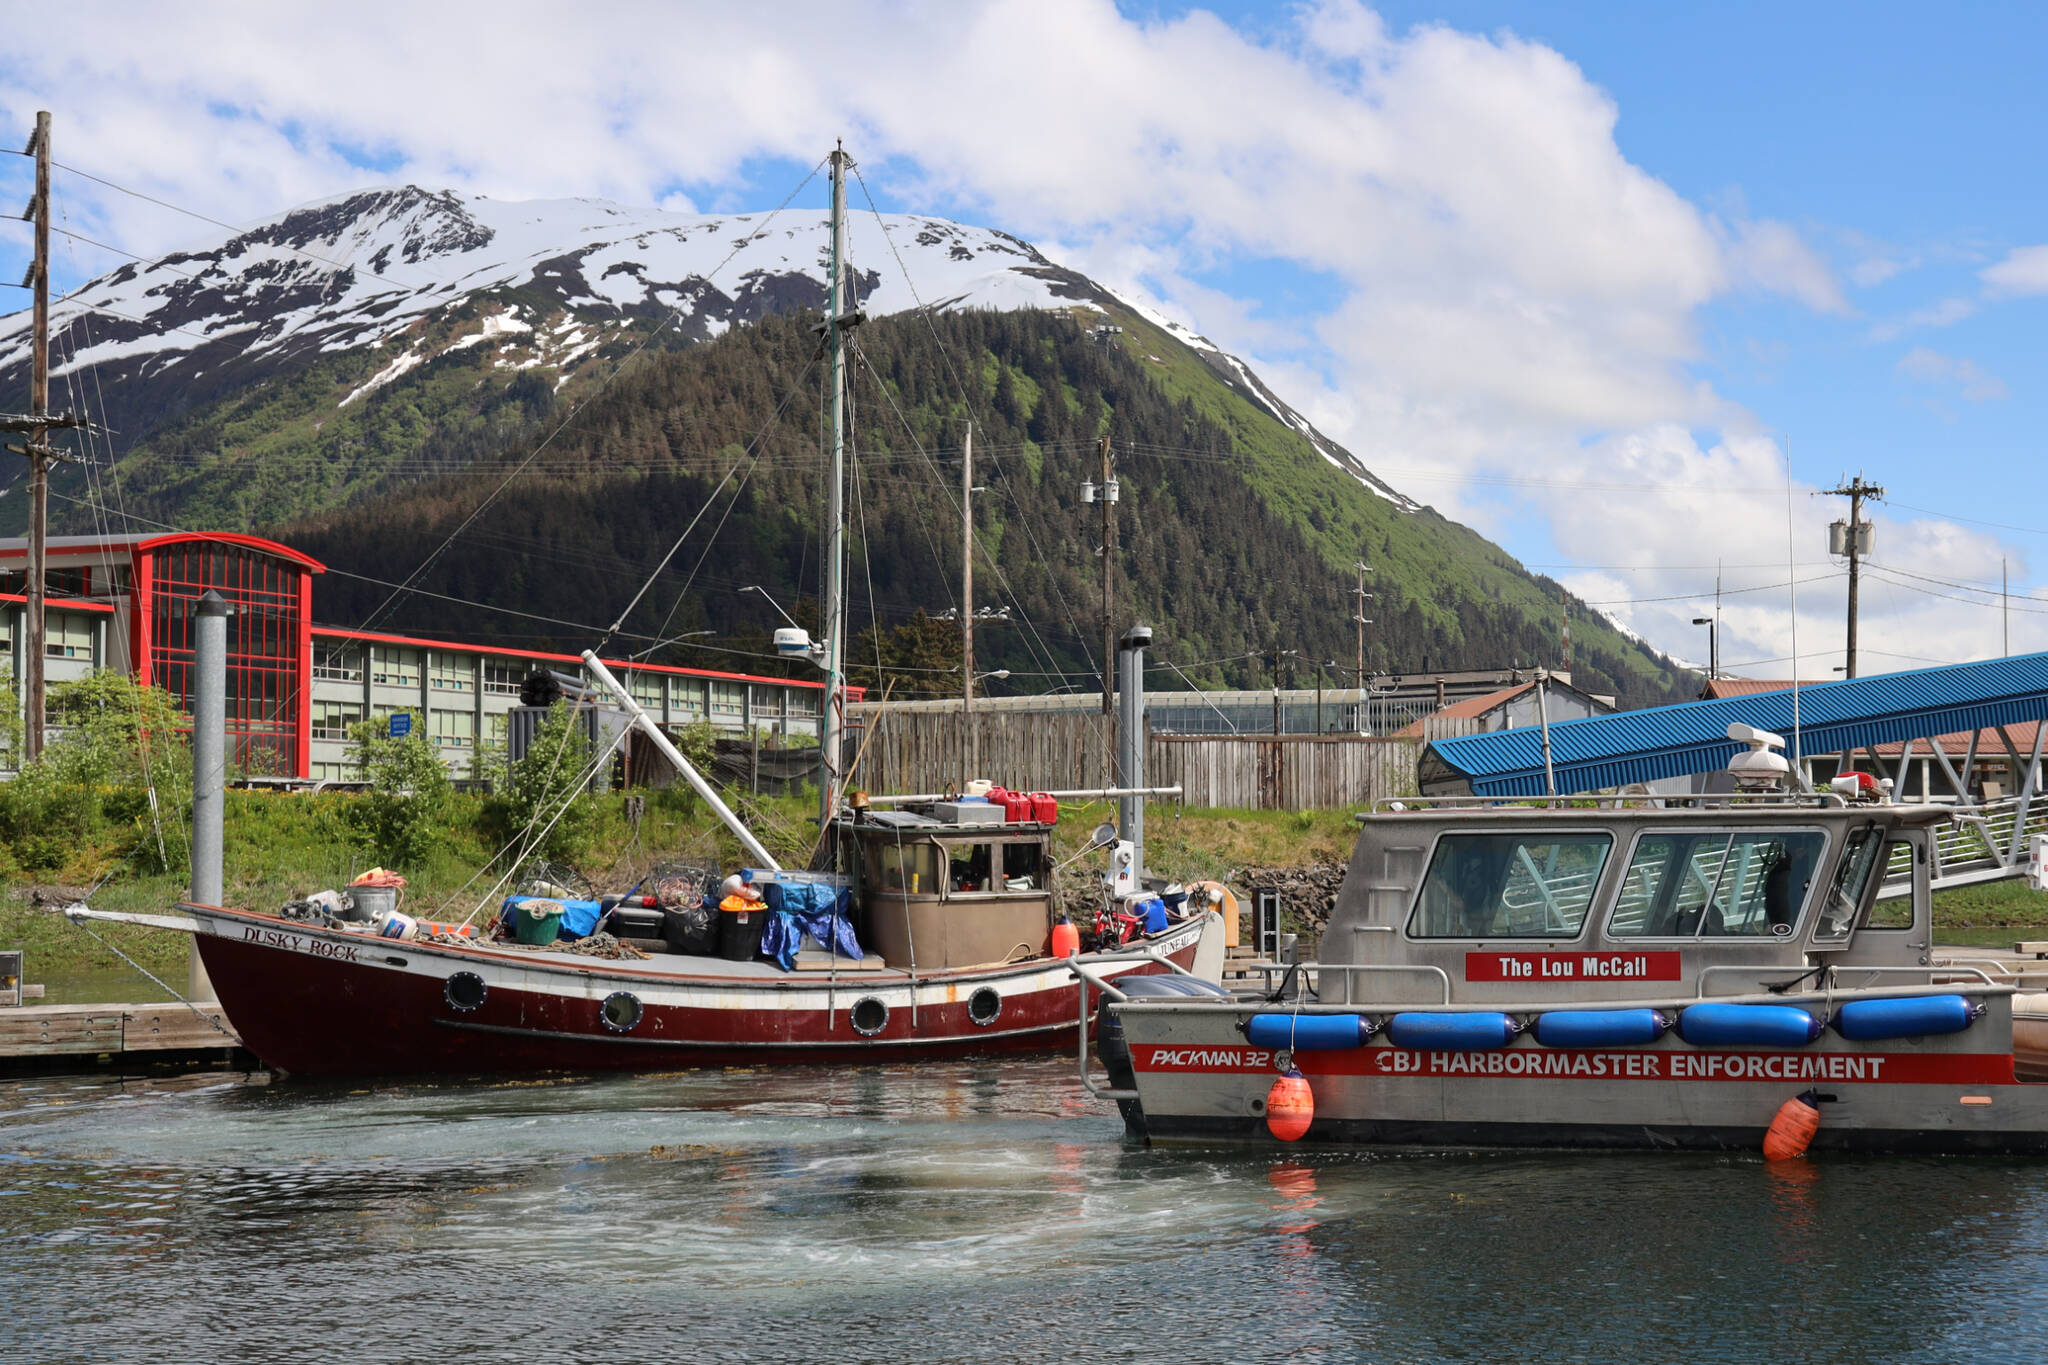 The City and Borough of Juneau Harbormaster Enforcement vessel drives past the Dusky Rock which sits at Aurora Harbor. The vessel was towed there from Sandy beach Friday evening after three people died within a three-day period aboard the vessel while anchored offshore. (Clarise Larson / Juneau Empire)